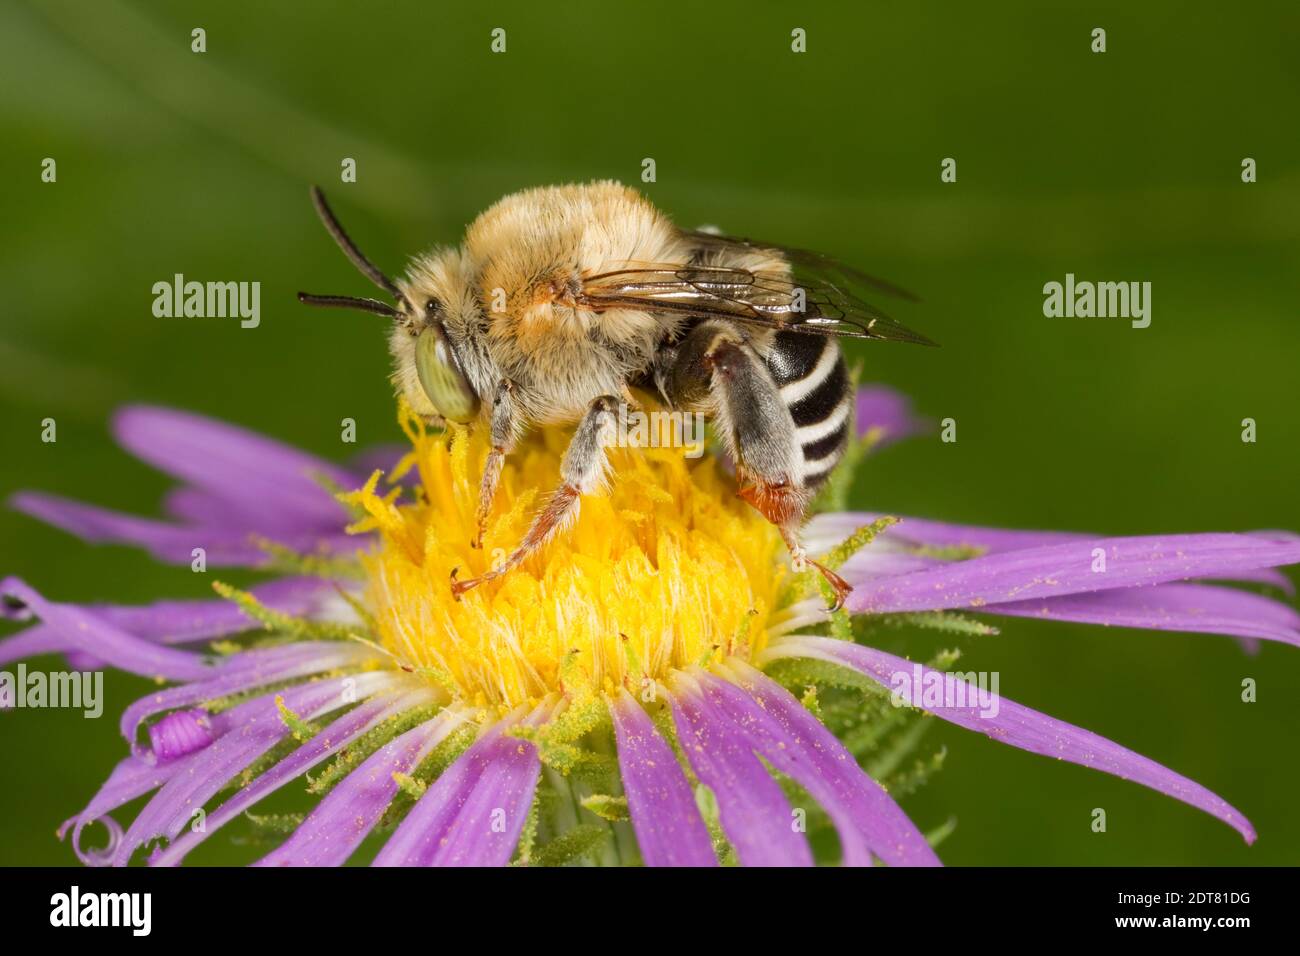 California Digger Bee male, Anthophora californica, Apidae. Body Length 11 mm. Nectaring at purple aster. Stock Photo